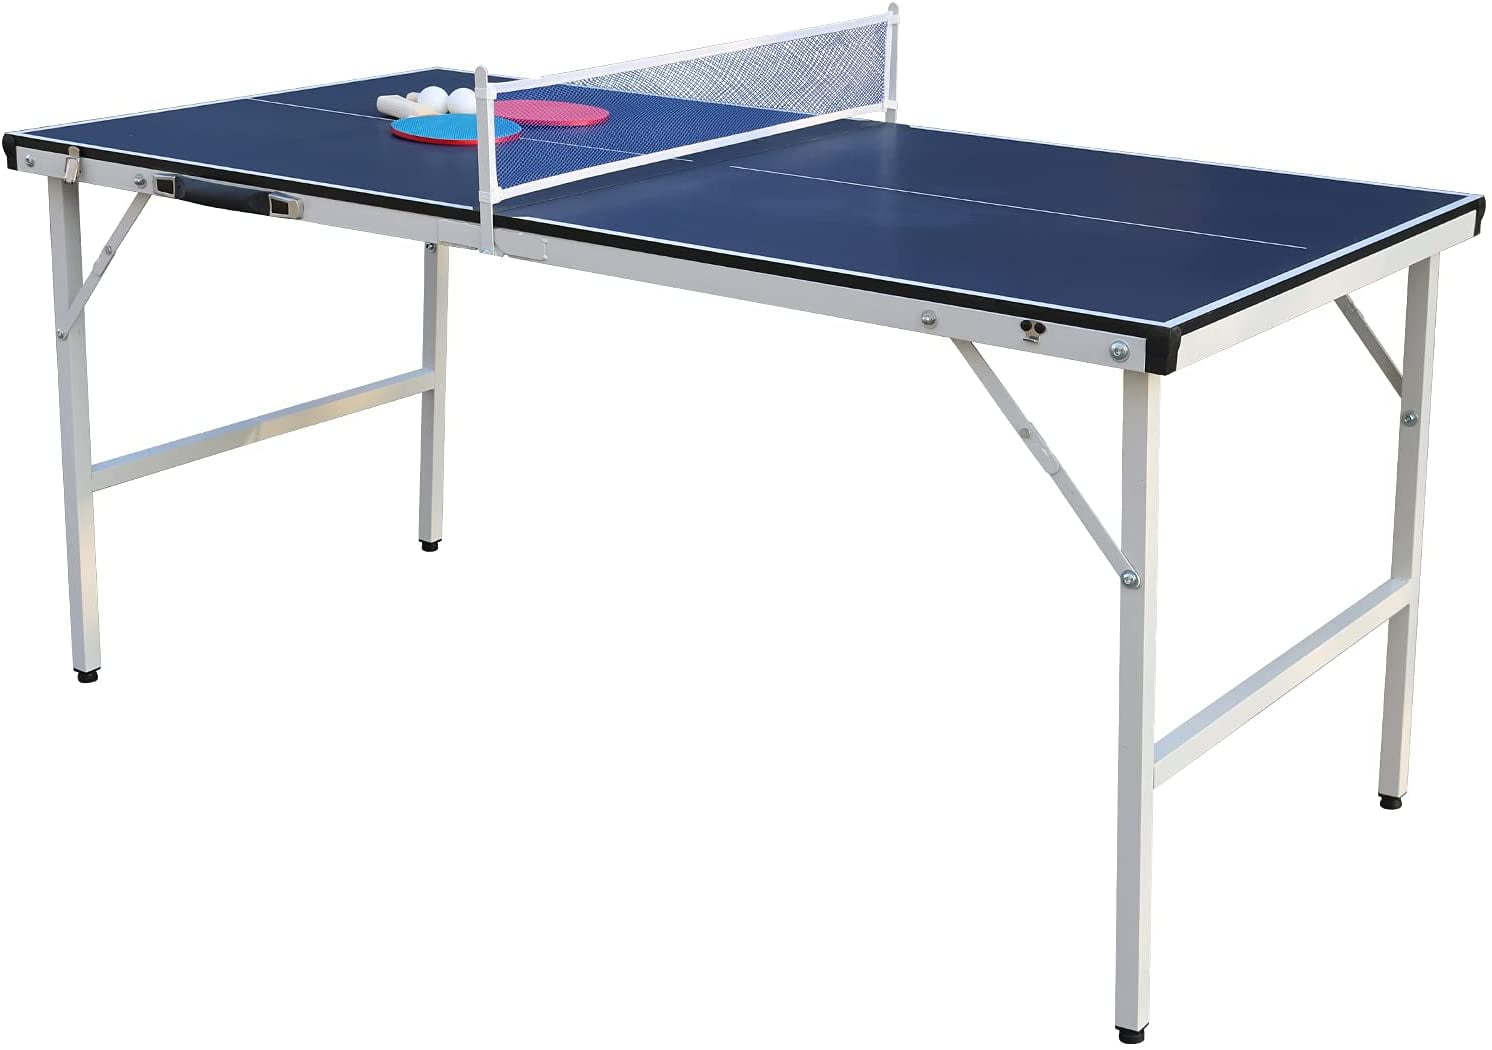 BLUE PREMIUM Double Fish high end 924 ping pong Table Tennis net & post set 